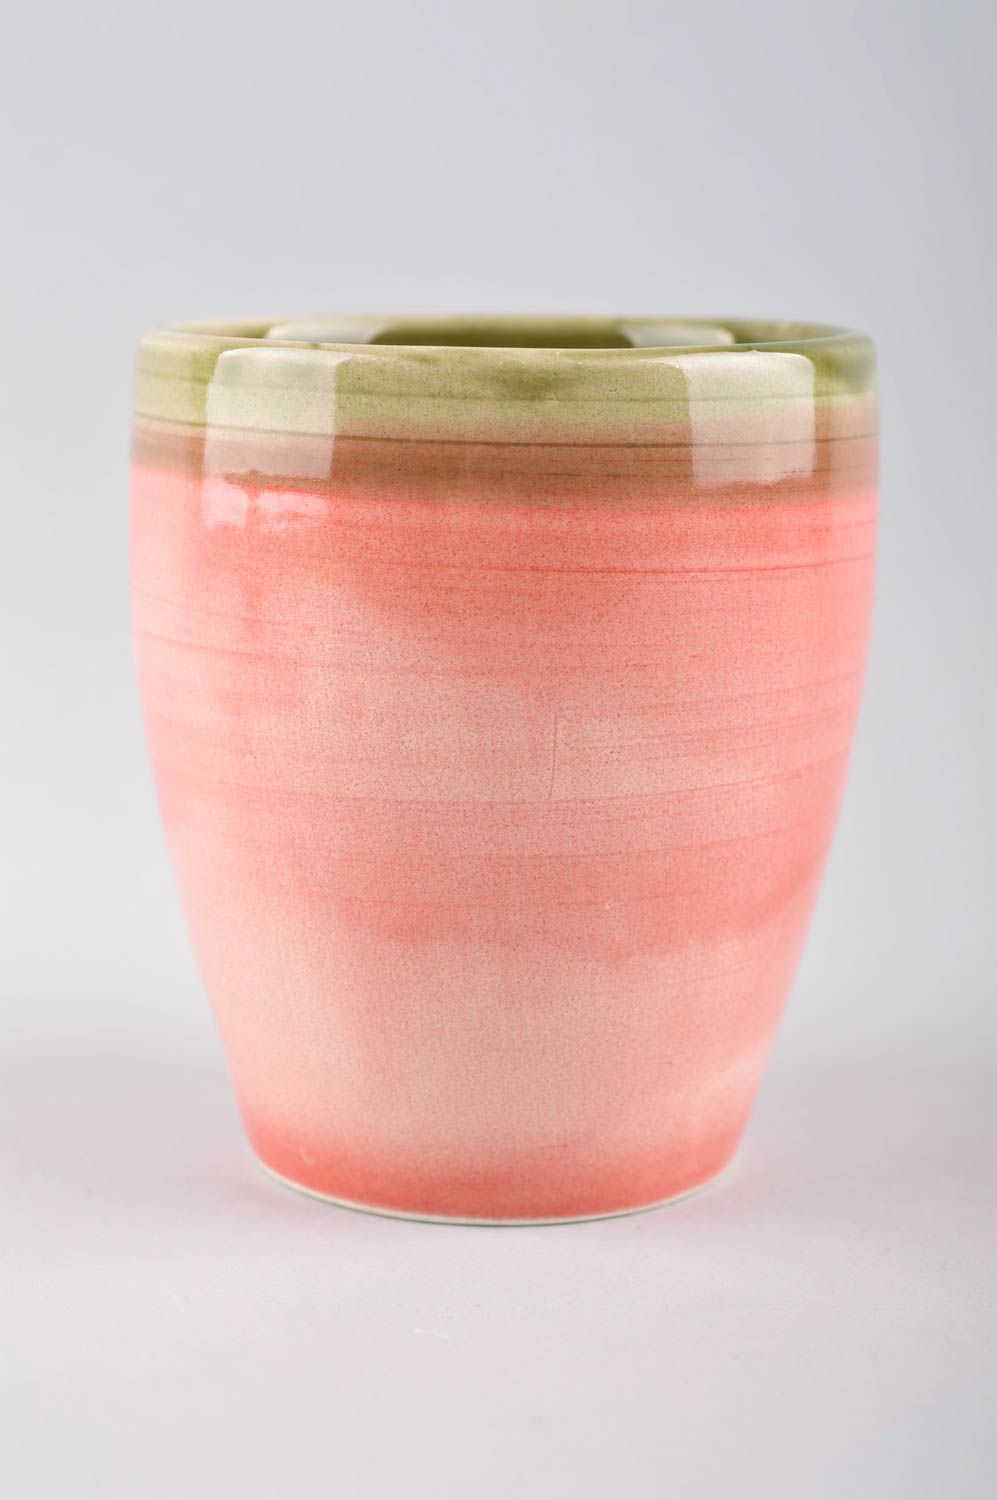 8 oz porcelain handmade art ceramic cup in pink color and light green glaze photo 2